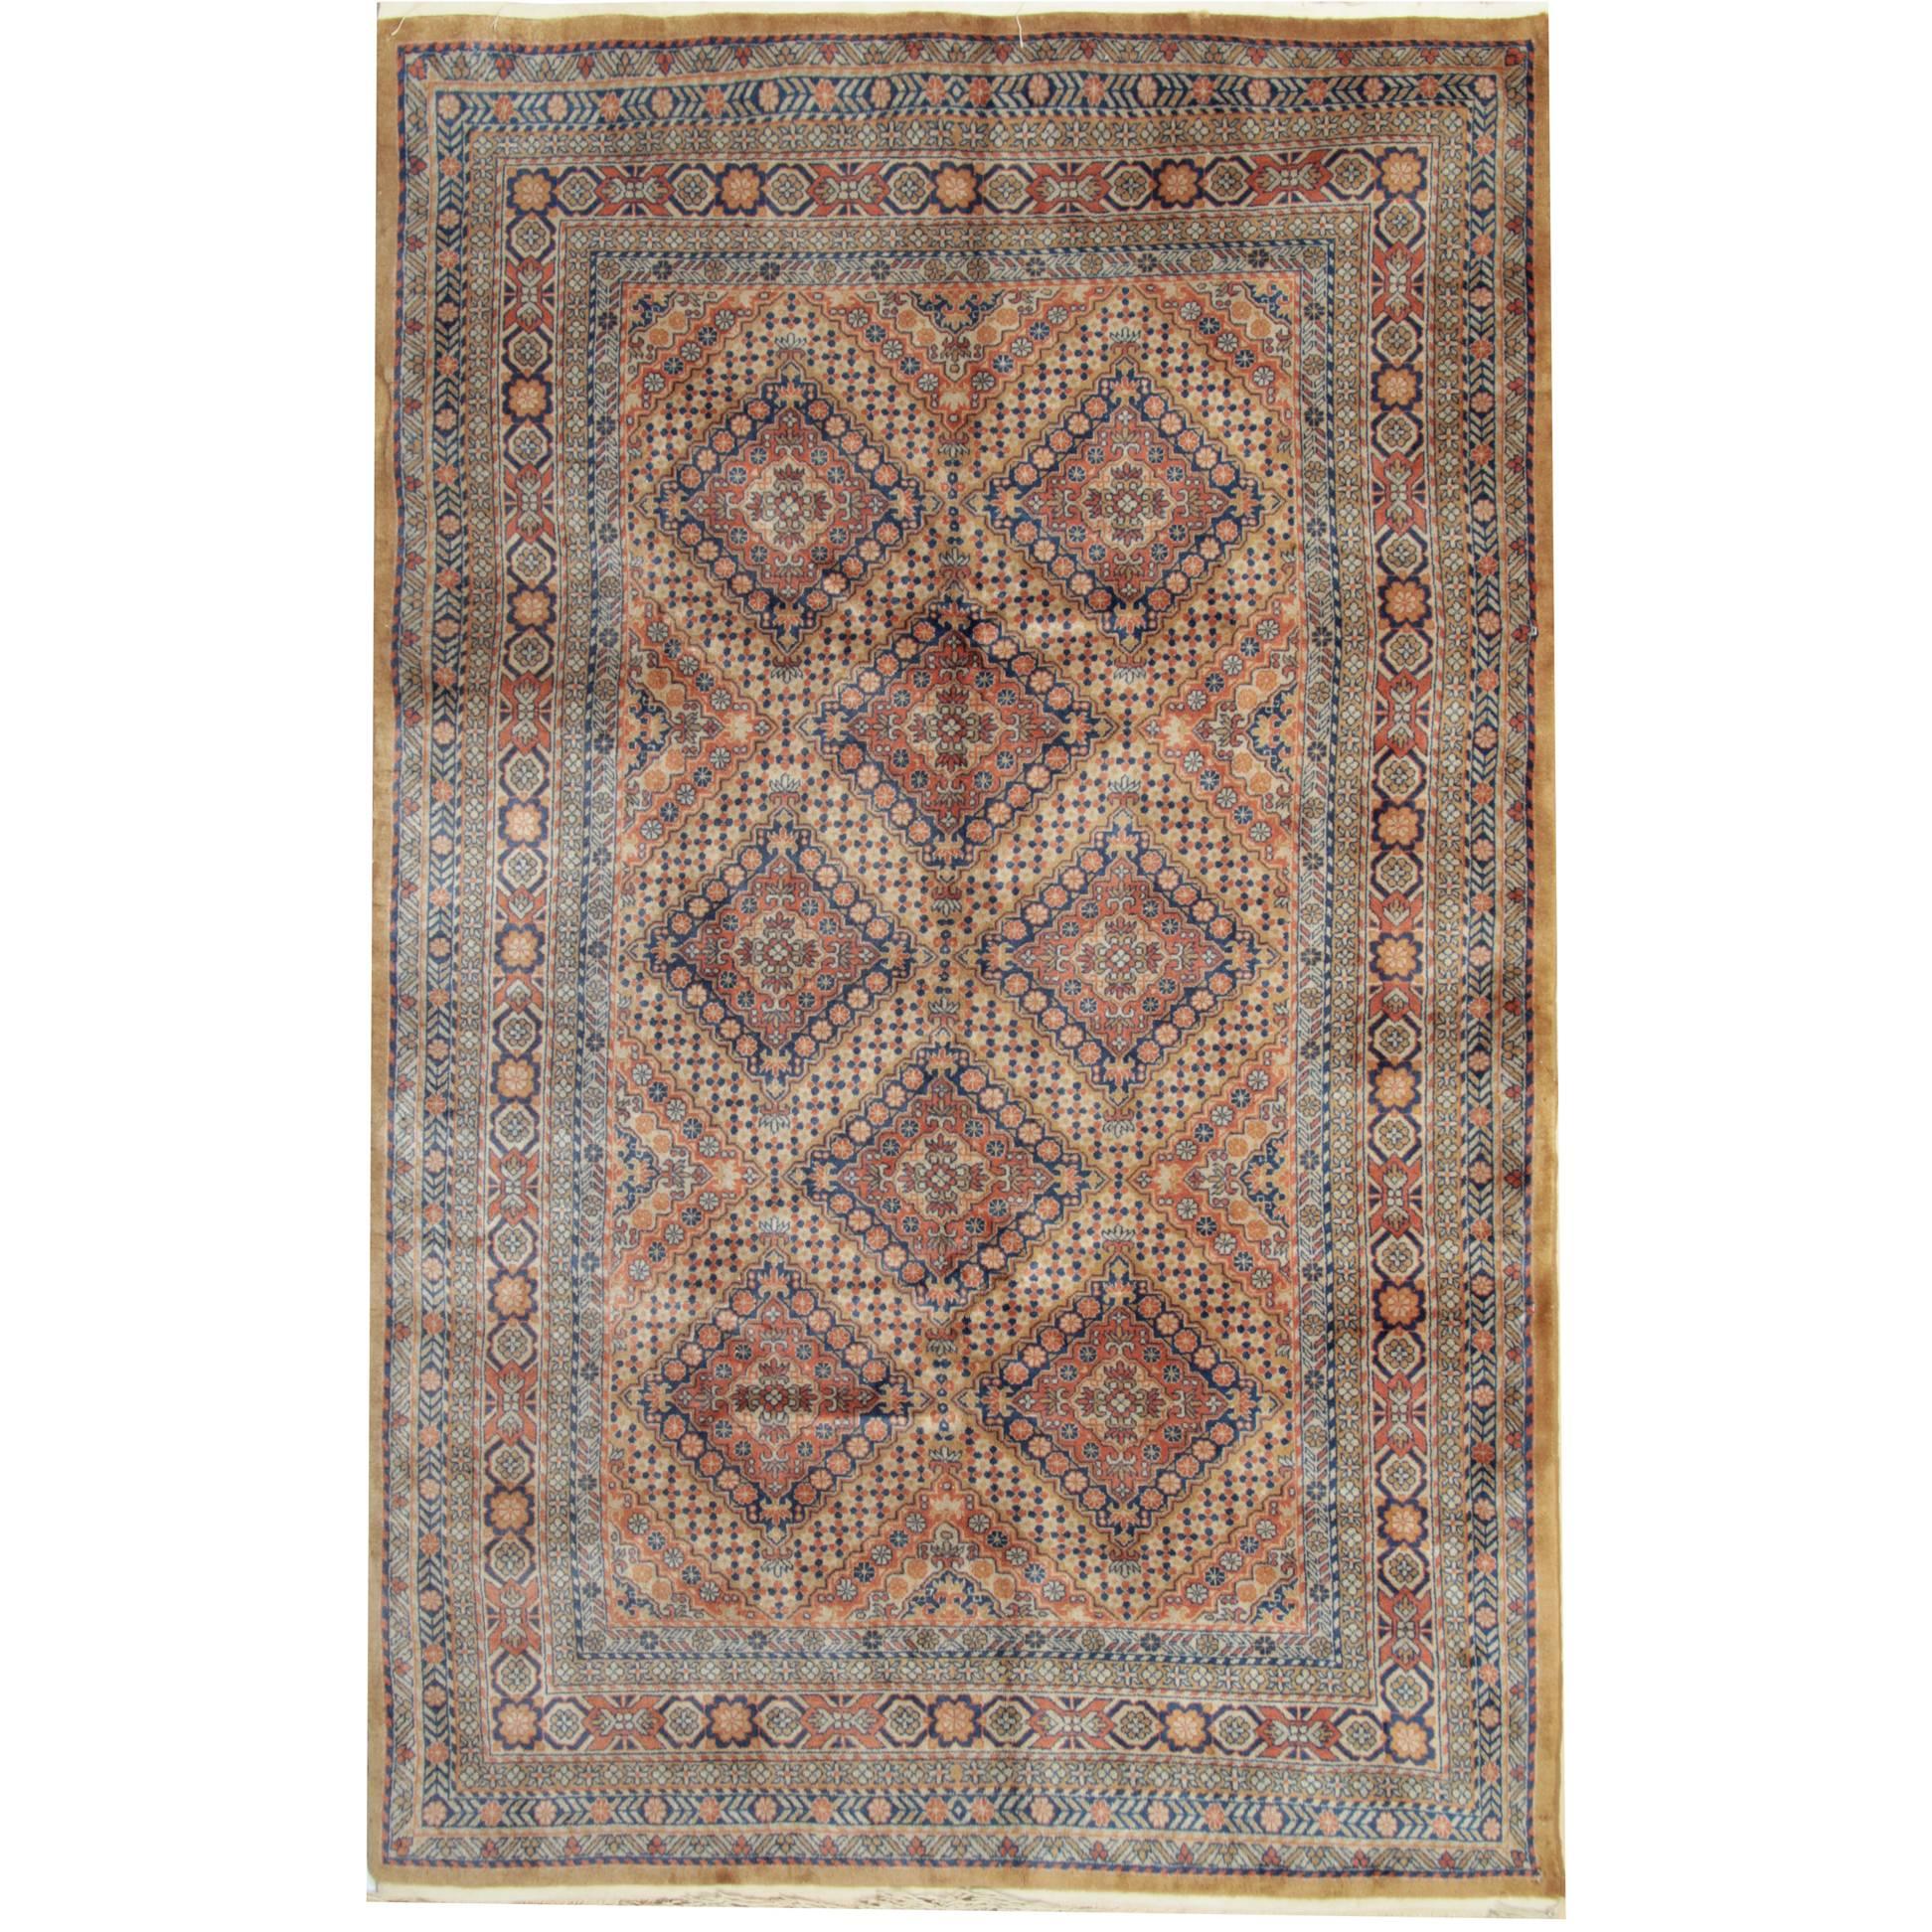 Geometric Rugs with Traditional Design, Brown Rug Antique Carpet from India 